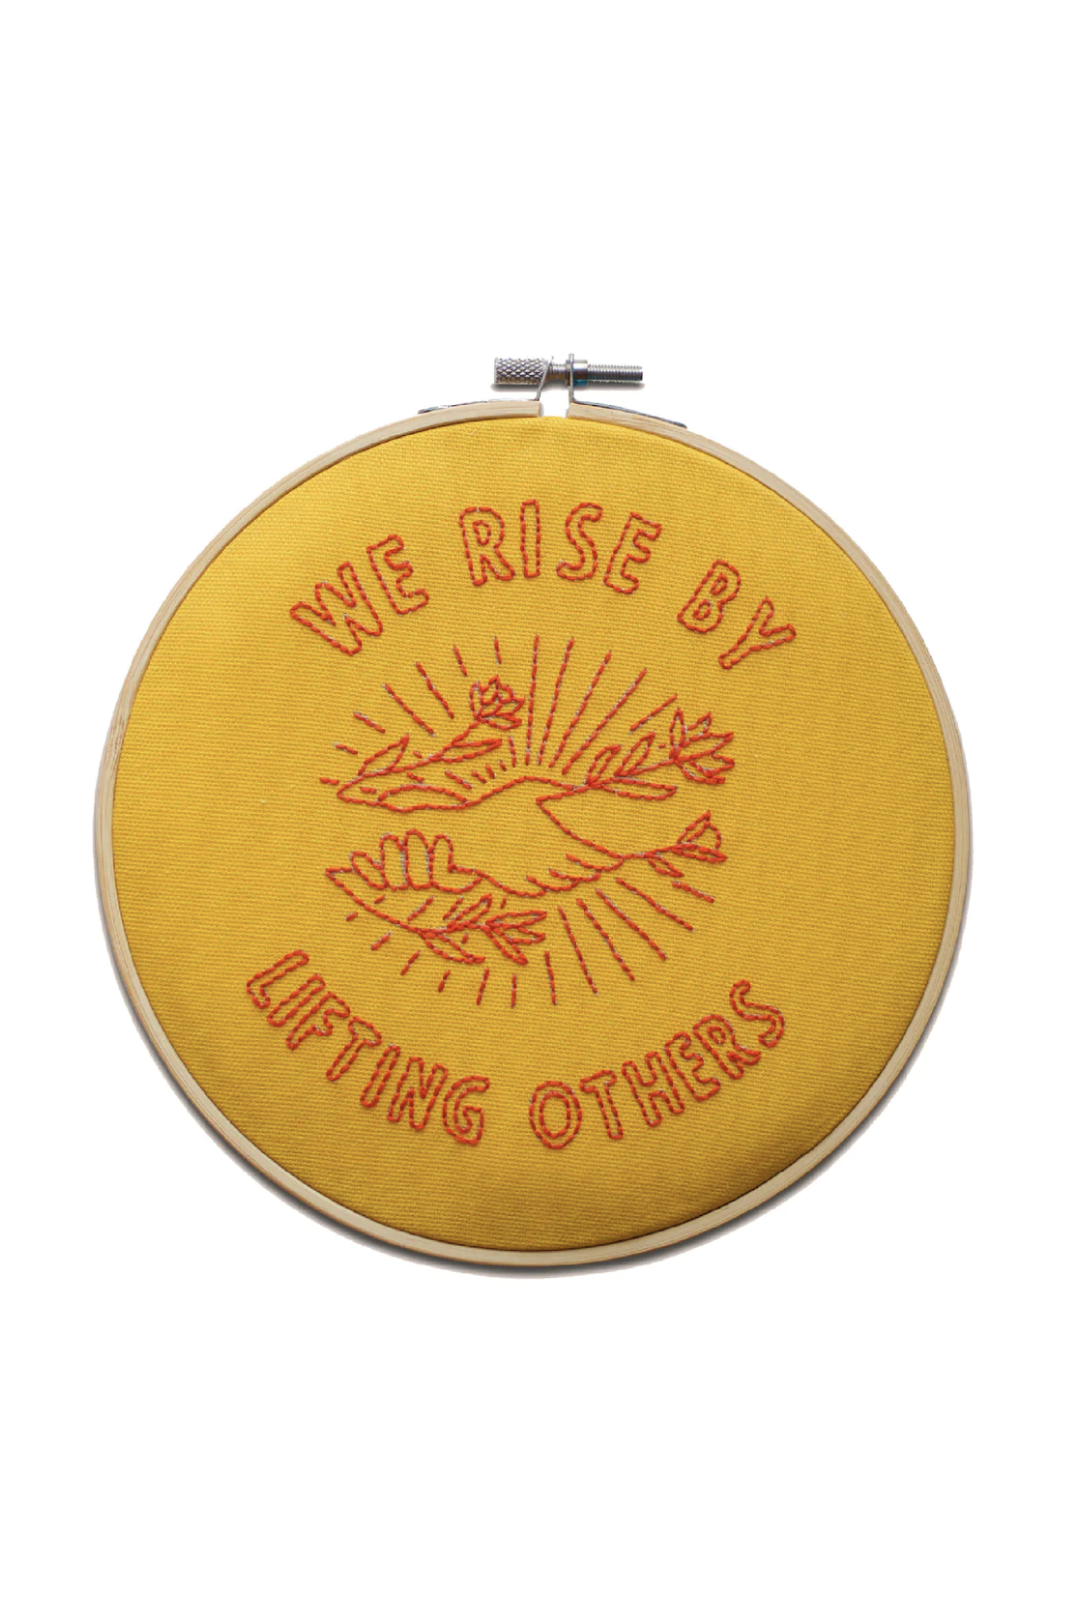 Cotton Clara | We Rise by Lifting Others Hoop Embroidery Kit